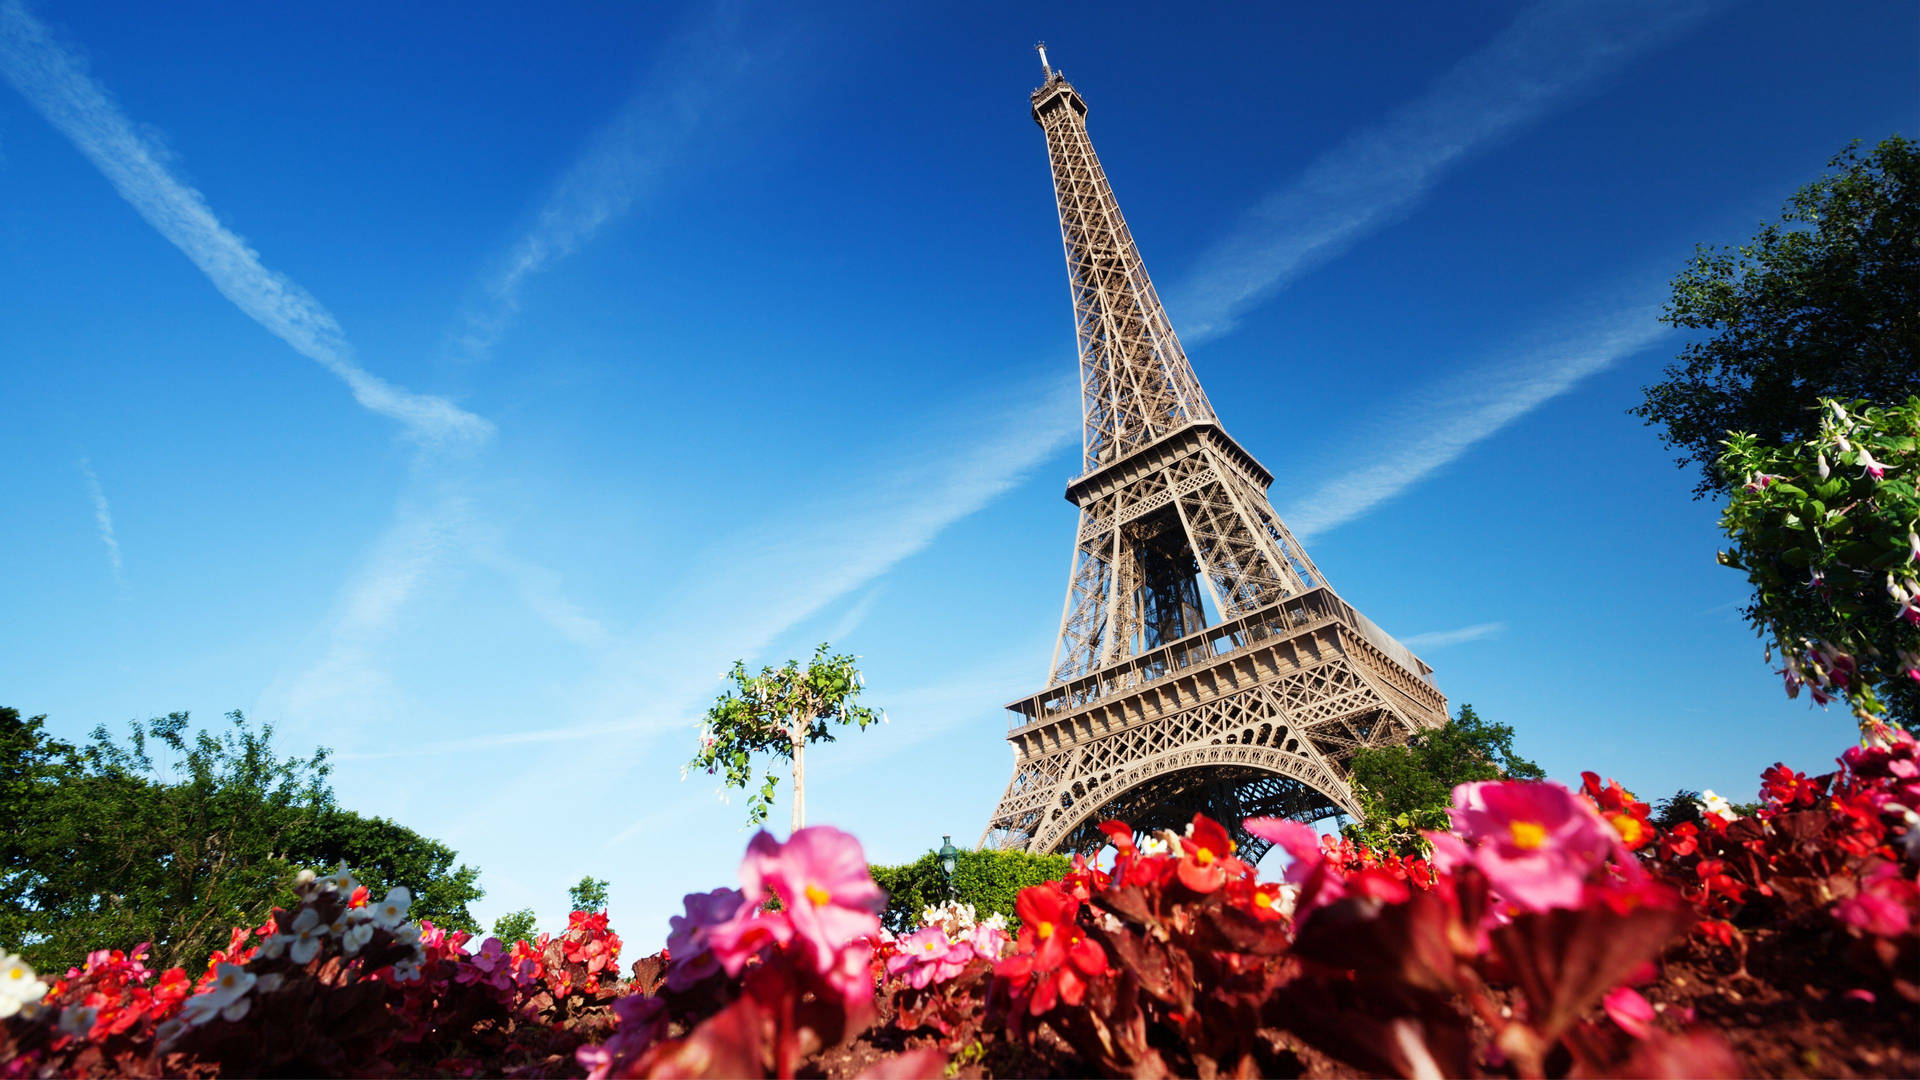 Flowers And The Beautiful Eiffel Tower In Paris Wallpaper